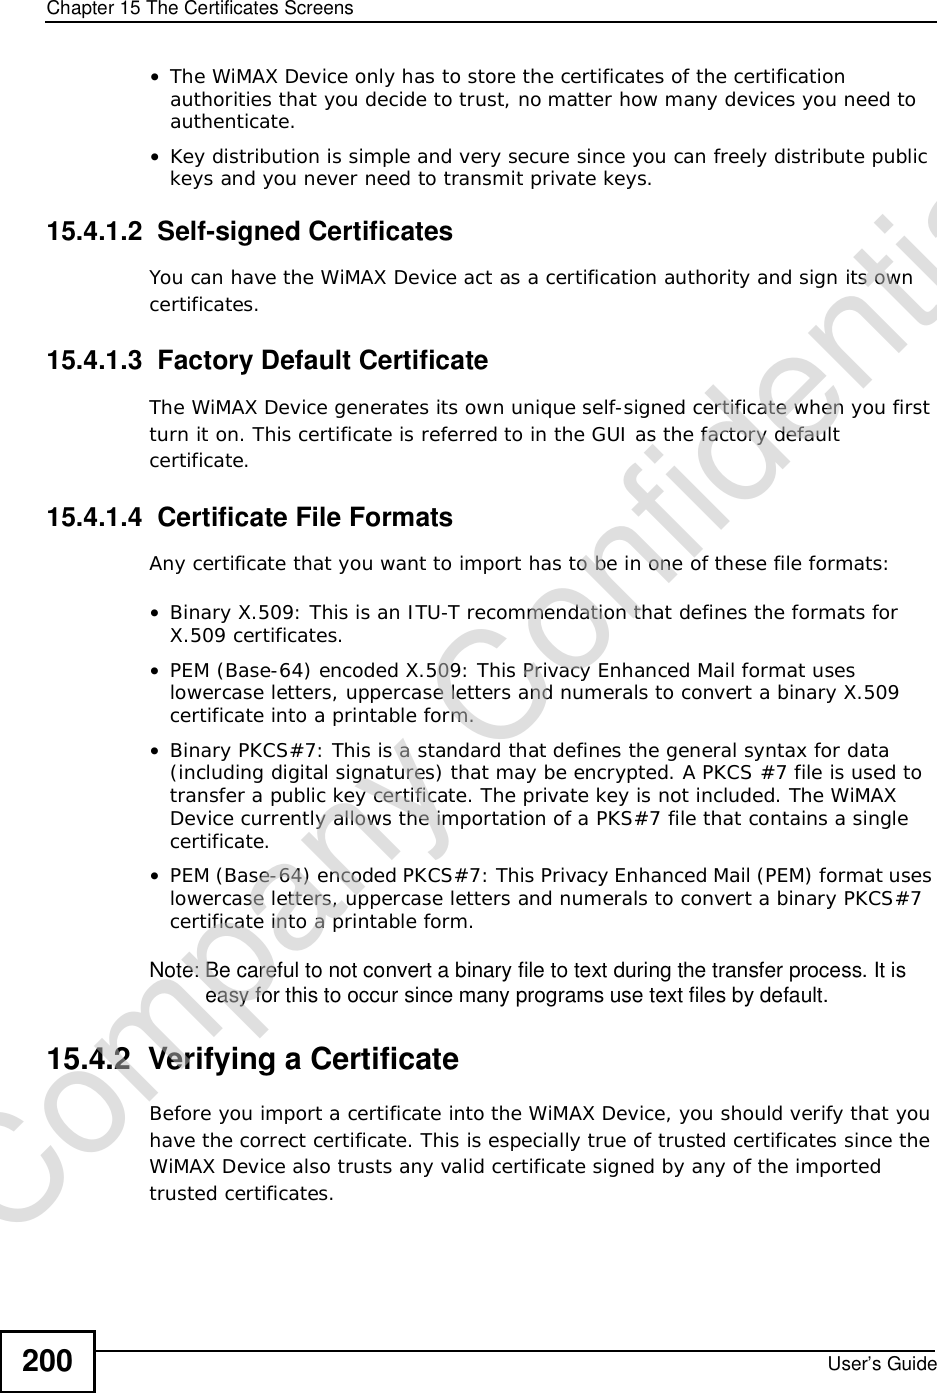 Chapter 15The Certificates ScreensUser’s Guide200•The WiMAX Device only has to store the certificates of the certification authorities that you decide to trust, no matter how many devices you need to authenticate. •Key distribution is simple and very secure since you can freely distribute public keys and you never need to transmit private keys.15.4.1.2  Self-signed CertificatesYou can have the WiMAX Device act as a certification authority and sign its own certificates.15.4.1.3  Factory Default CertificateThe WiMAX Device generates its own unique self-signed certificate when you first turn it on. This certificate is referred to in the GUI as the factory default certificate. 15.4.1.4  Certificate File FormatsAny certificate that you want to import has to be in one of these file formats:•Binary X.509: This is an ITU-T recommendation that defines the formats for X.509 certificates.•PEM (Base-64) encoded X.509: This Privacy Enhanced Mail format uses lowercase letters, uppercase letters and numerals to convert a binary X.509 certificate into a printable form.•Binary PKCS#7: This is a standard that defines the general syntax for data (including digital signatures) that may be encrypted. A PKCS #7 file is used to transfer a public key certificate. The private key is not included. The WiMAX Device currently allows the importation of a PKS#7 file that contains a single certificate. •PEM (Base-64) encoded PKCS#7: This Privacy Enhanced Mail (PEM) format uses lowercase letters, uppercase letters and numerals to convert a binary PKCS#7 certificate into a printable form.Note: Be careful to not convert a binary file to text during the transfer process. It is easy for this to occur since many programs use text files by default. 15.4.2  Verifying a CertificateBefore you import a certificate into the WiMAX Device, you should verify that you have the correct certificate. This is especially true of trusted certificates since the WiMAX Device also trusts any valid certificate signed by any of the imported trusted certificates.Company Confidential